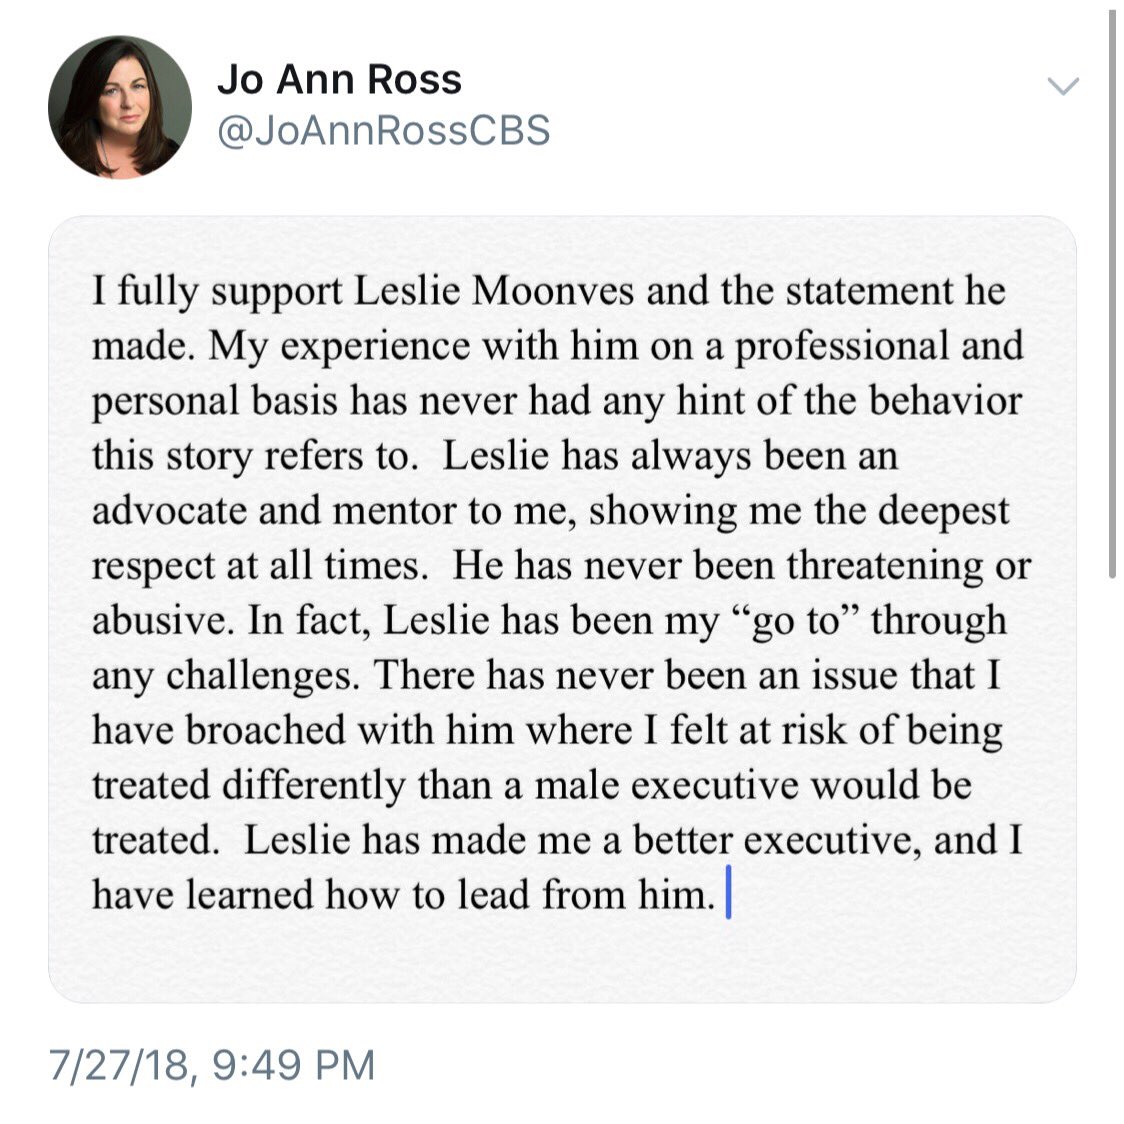 23. Tweeted by  @JoAnnRossCBS, President and Chief Advertising Revenue Officer of CBS, on July 27, 2018